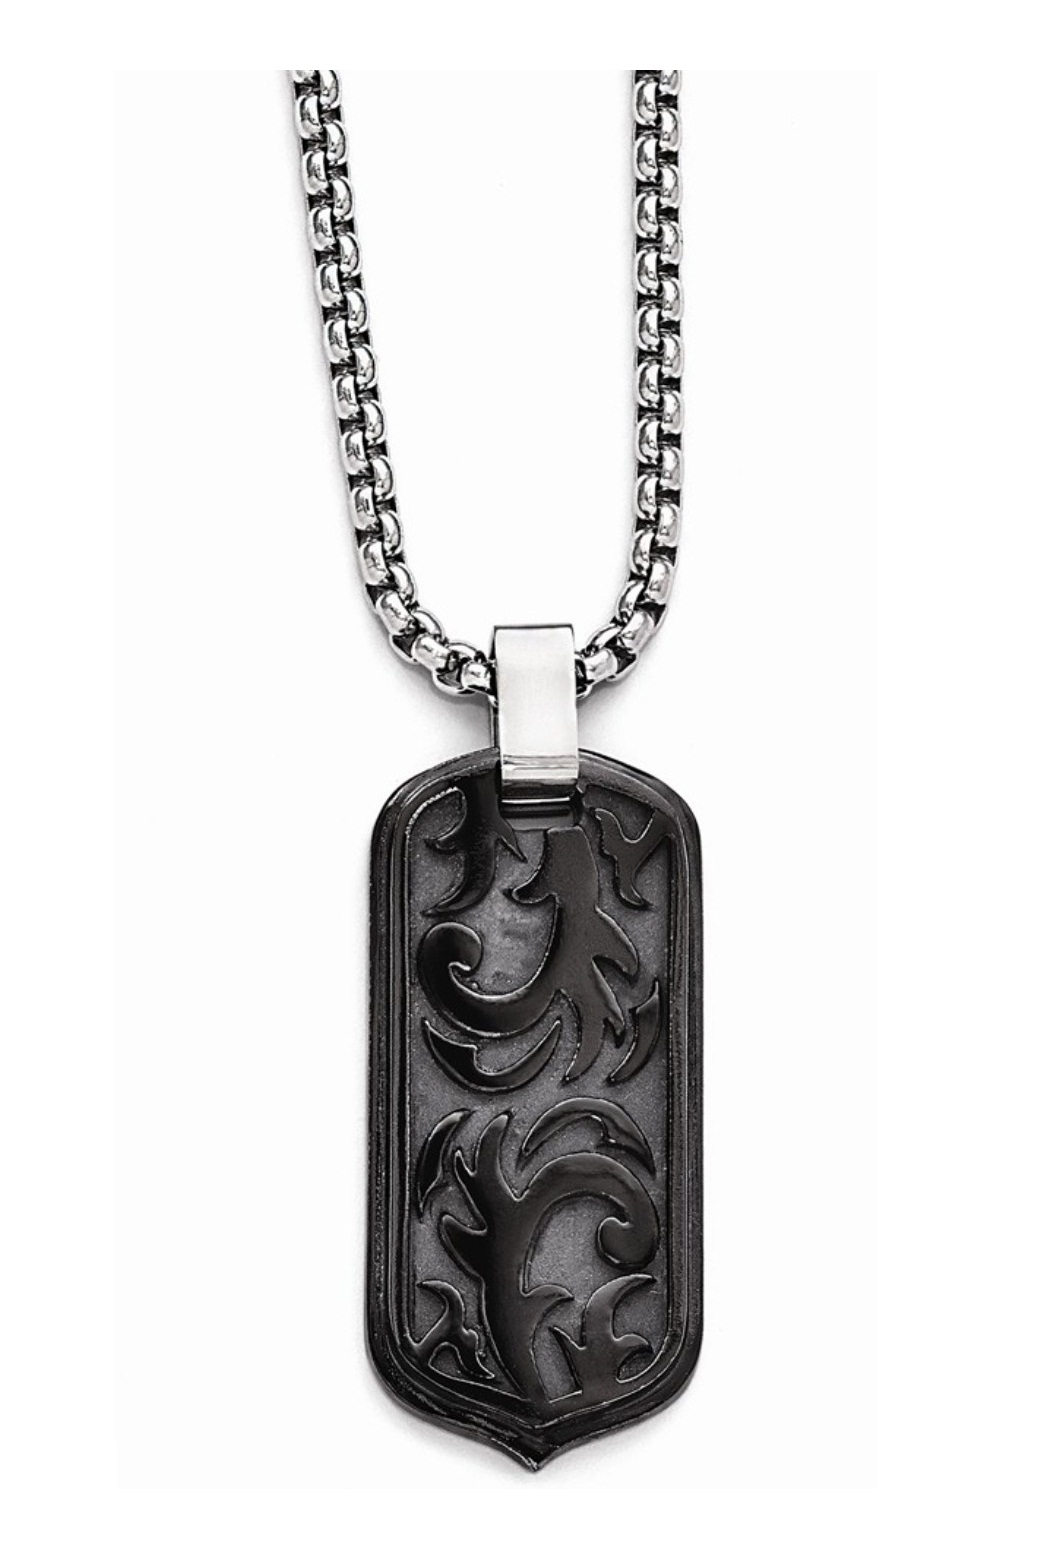  Black Ti Casted Dog Tag Pendant Necklace